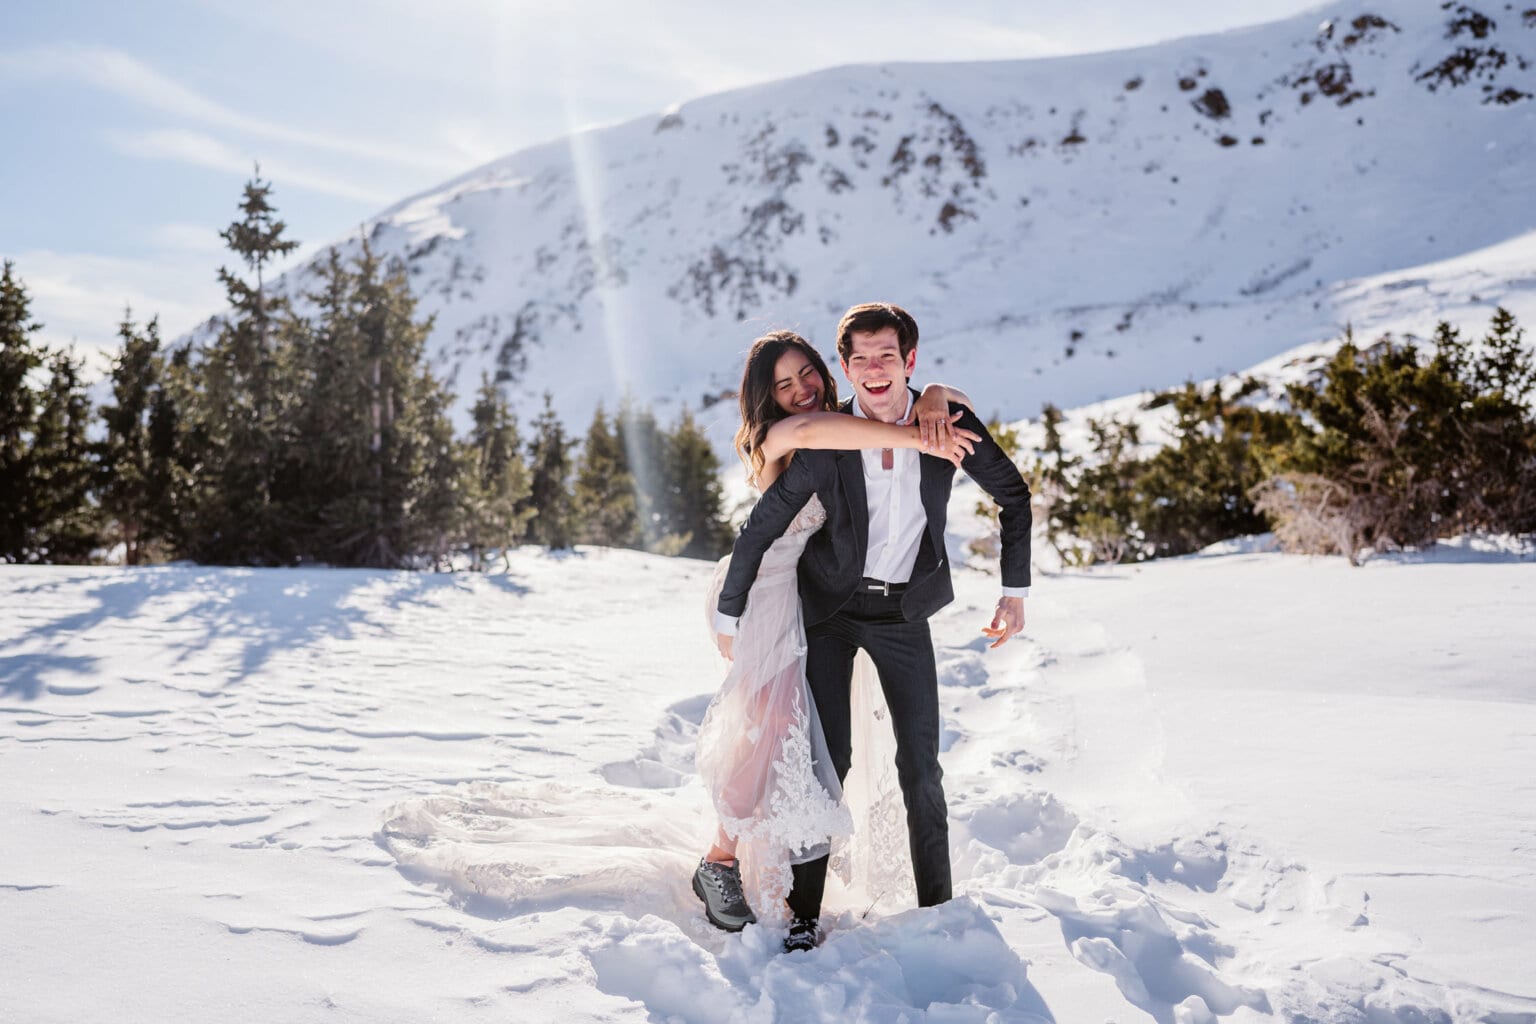 Bride jumping on her grooms back while dancing in the snow on their elopement day.